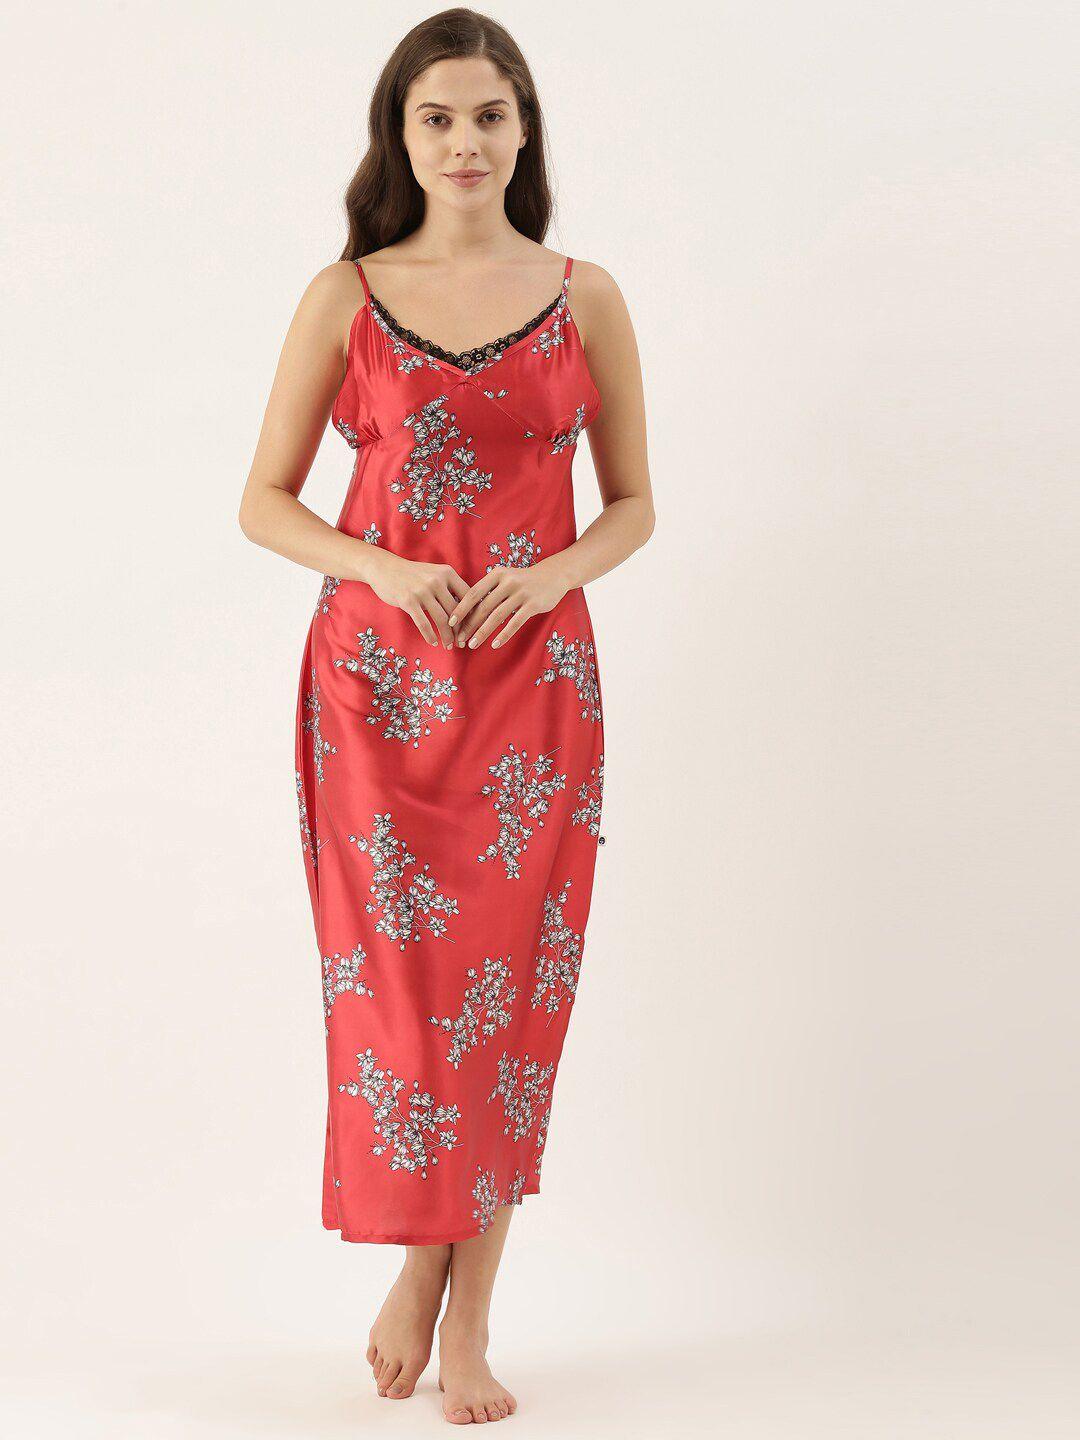 bannos-swagger-red-printed-nightdress